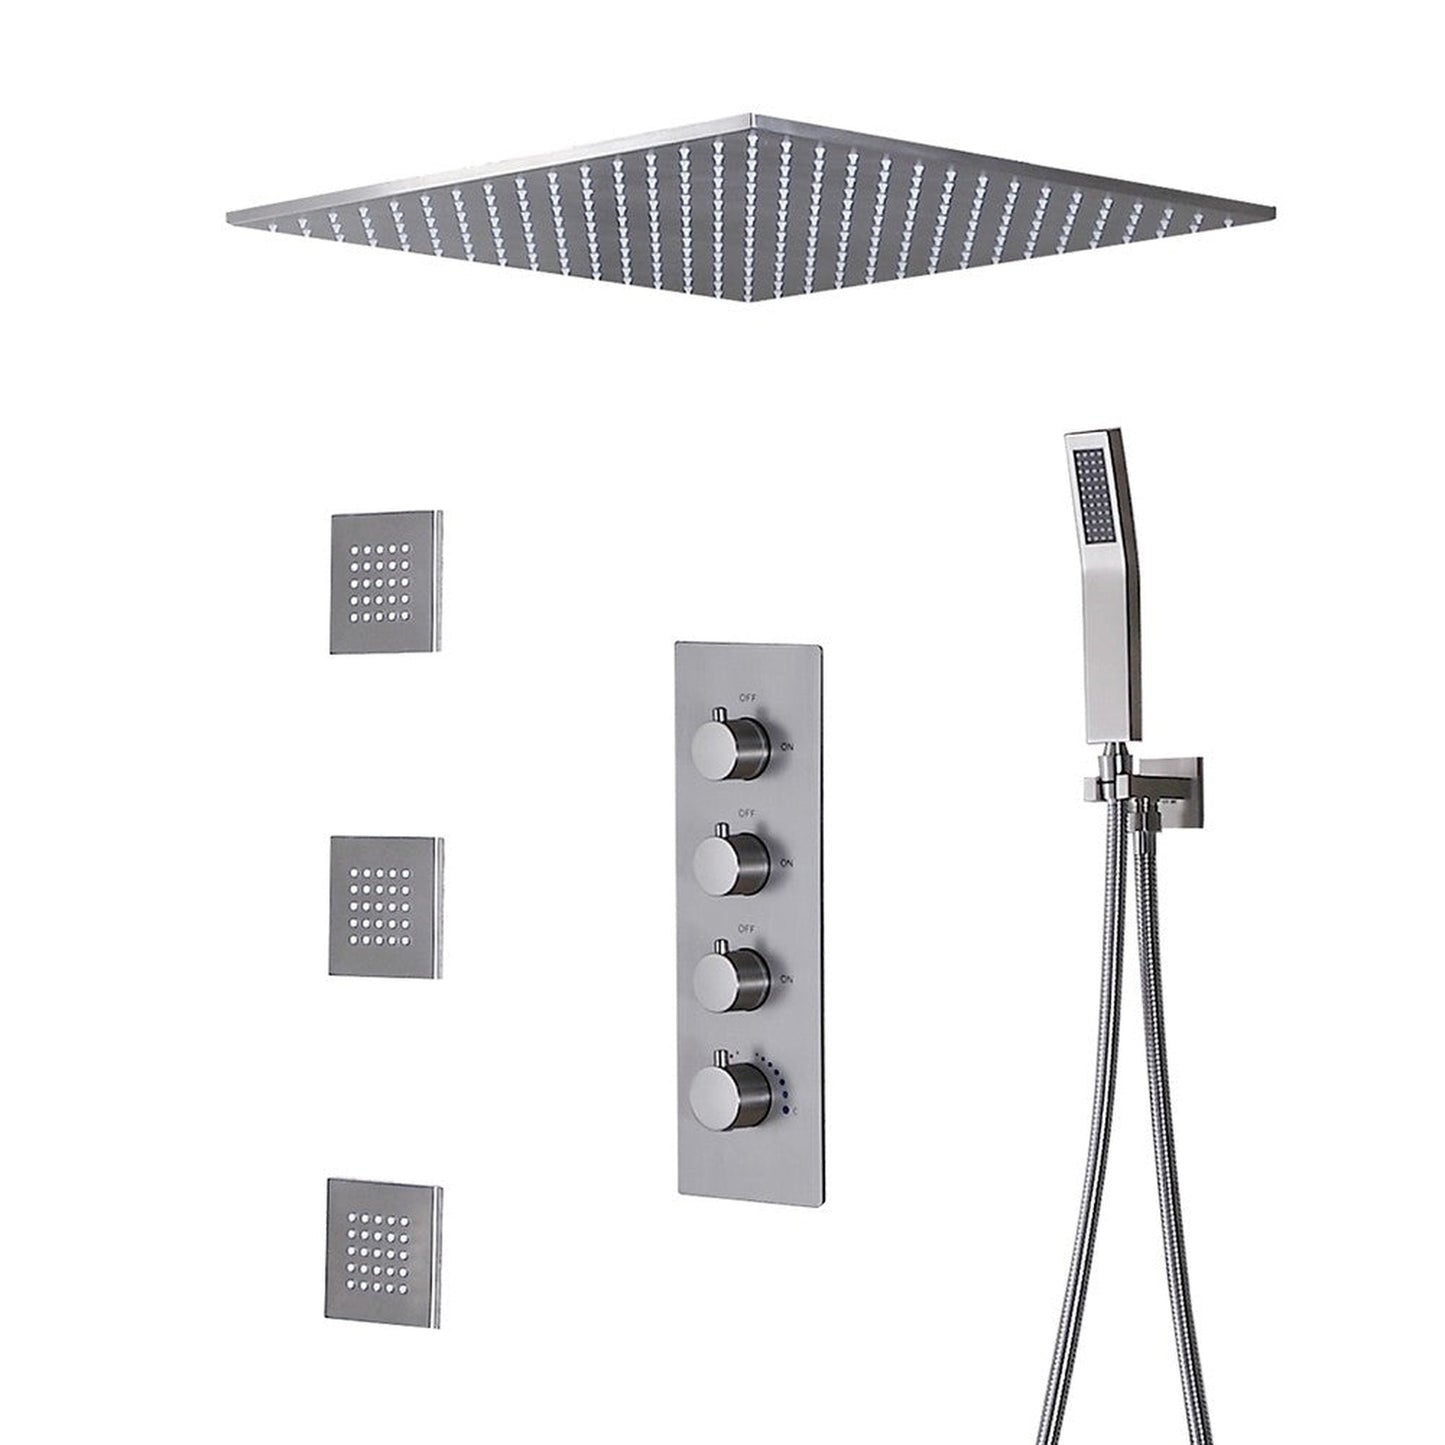 Fontana 31" x 31" Brushed Nickel Ceiling Mounted Thermostatic Valve Shower System With 3-Jet Sprays, Hand Shower and Water Powered LED Lights